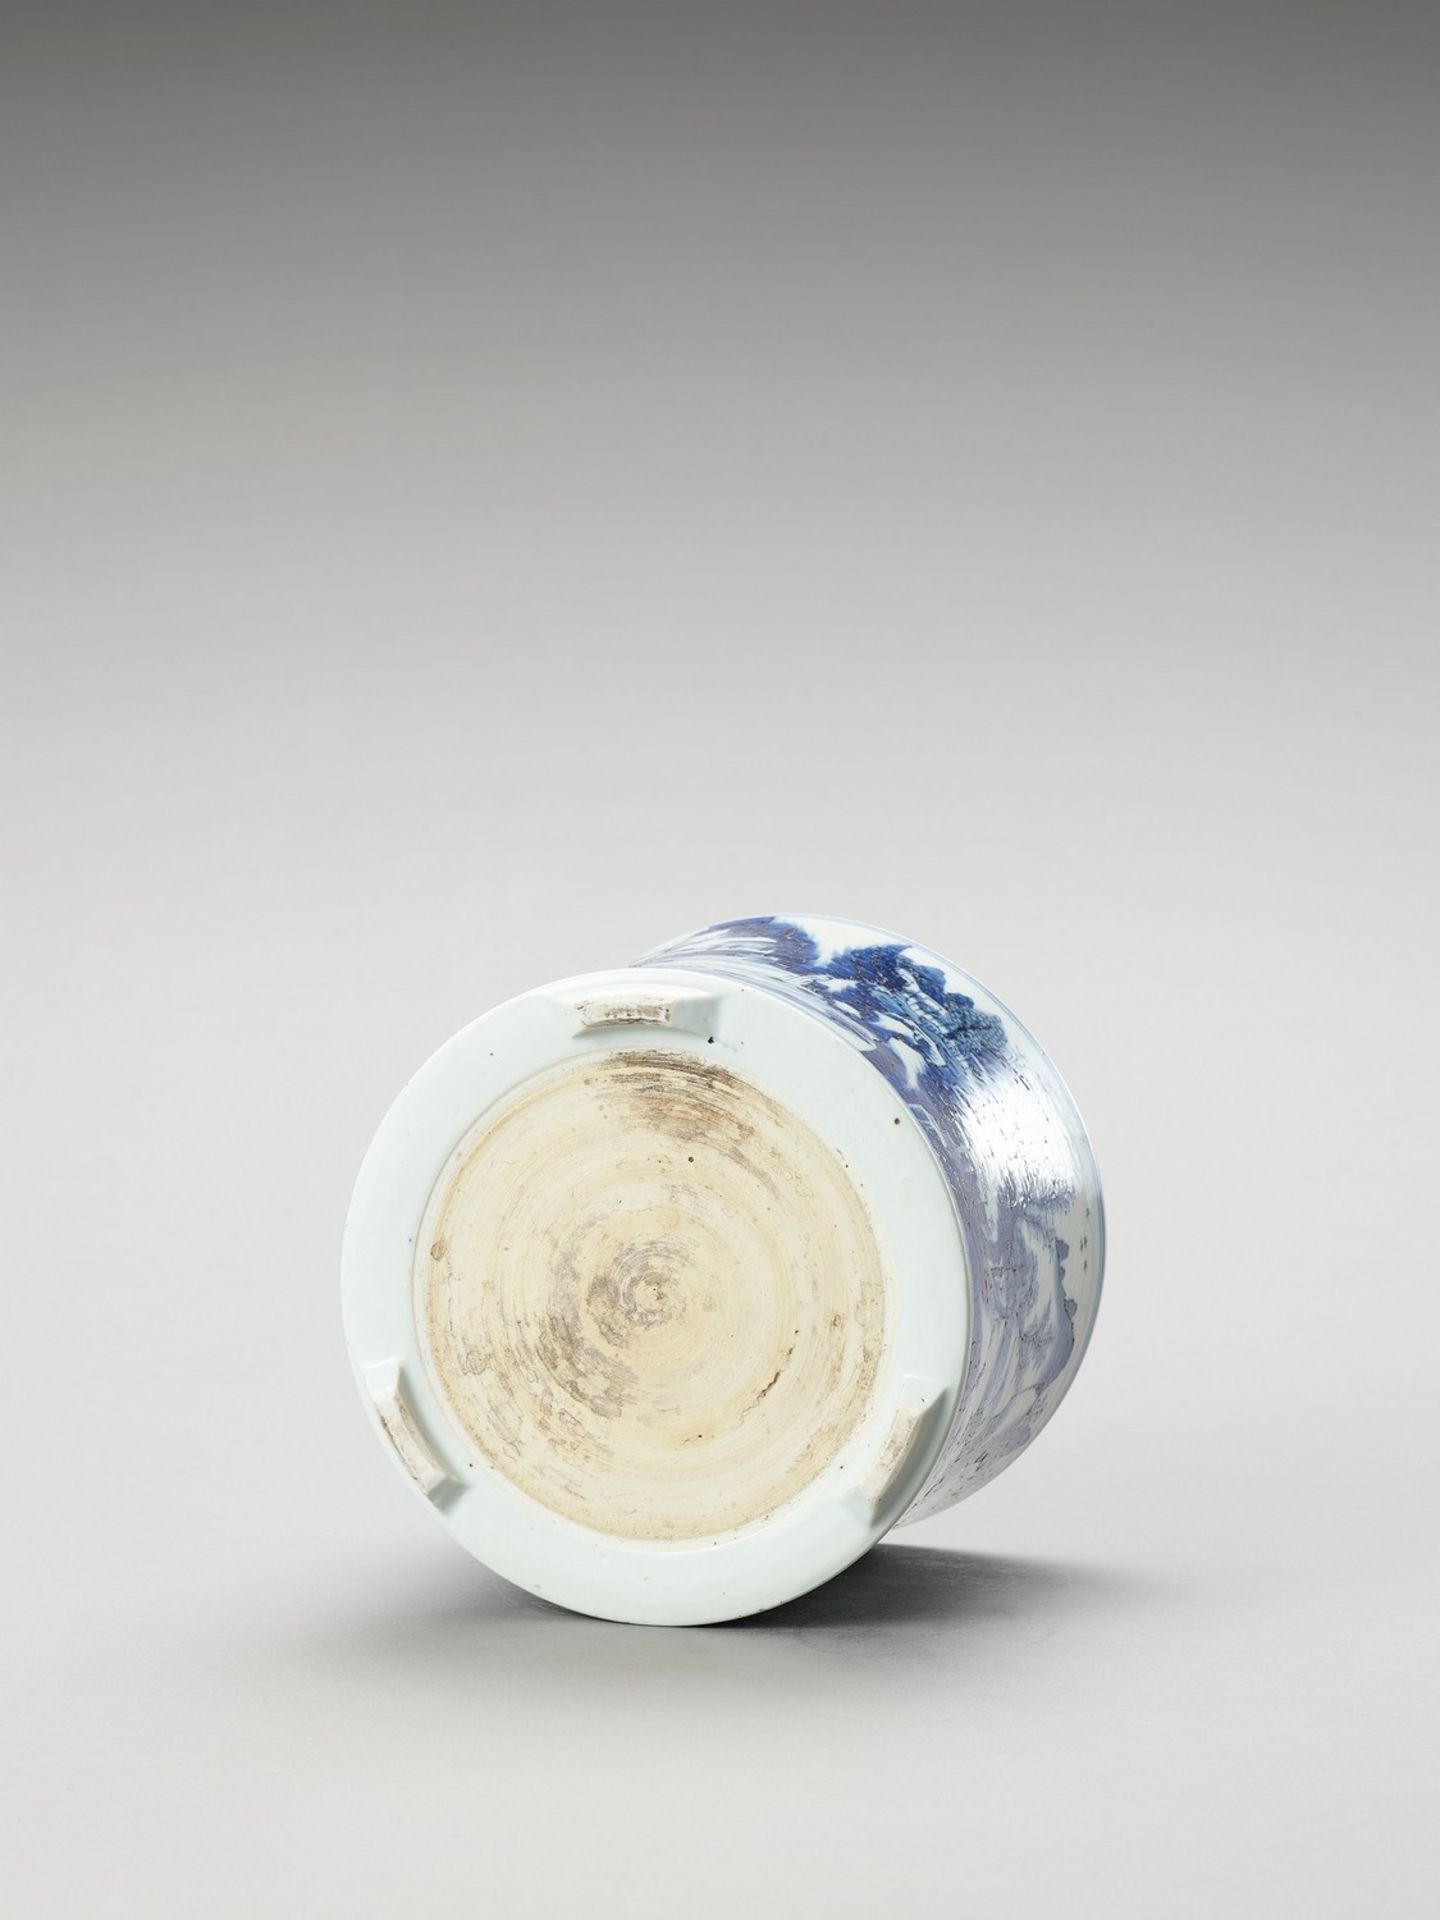 A FIGURATIVE BLUE AND WHITE PORCELAIN BRUSHPOT - Image 7 of 7